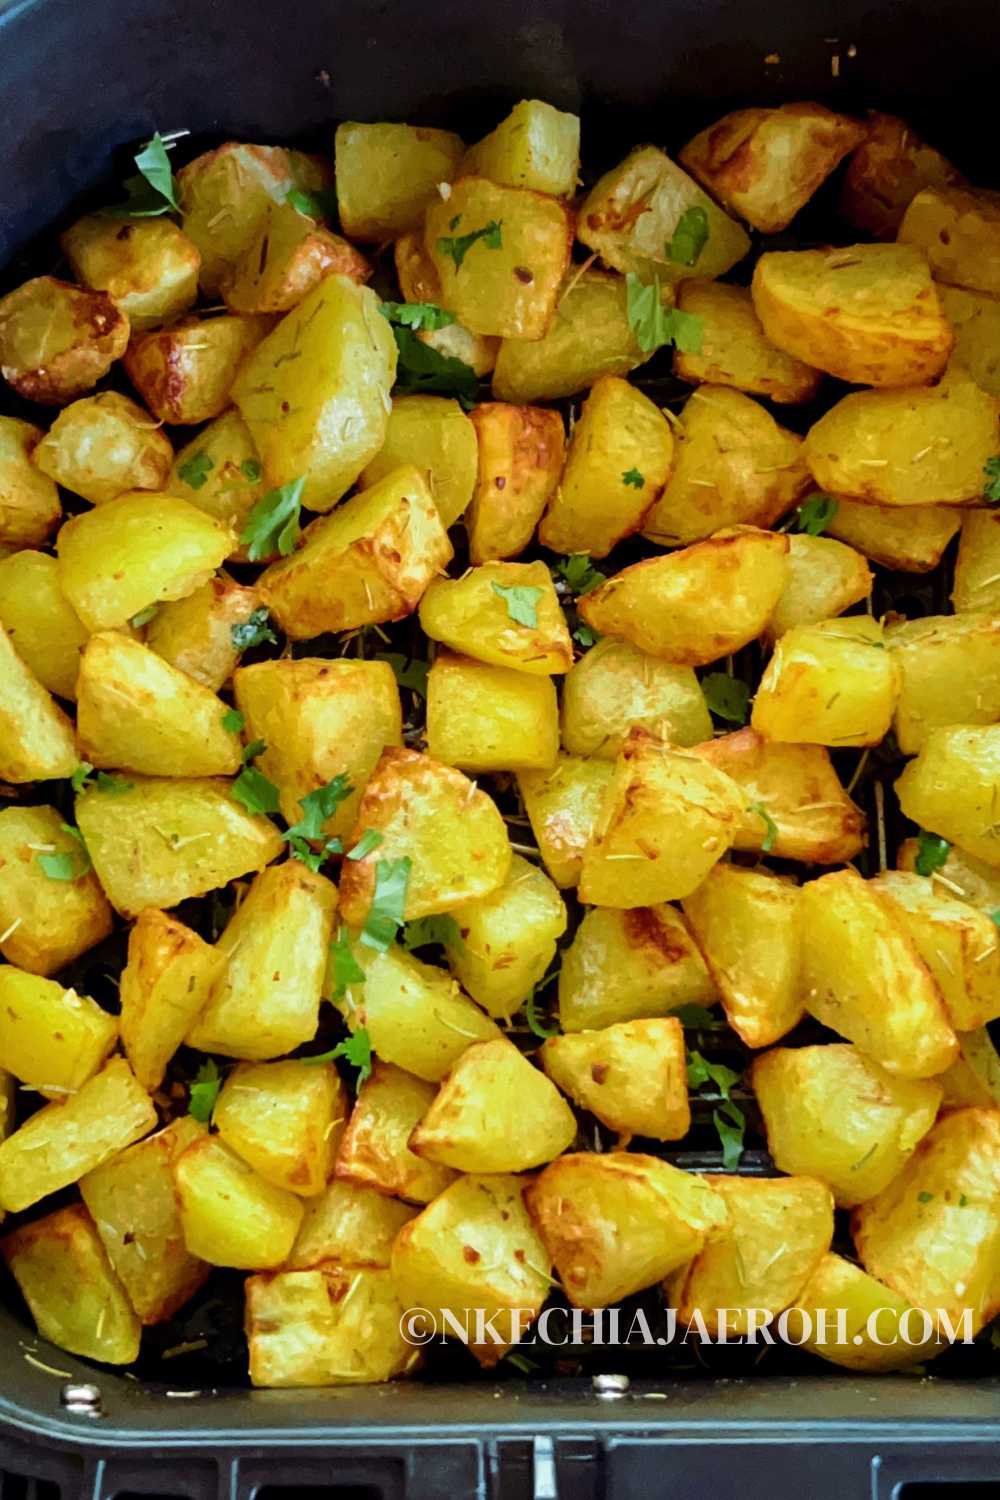 Air fryer roasted potatoes are perfect for the holidays, and the amazing flavors of garlic and rosemary make this dish incredibly flavorful and inviting! These air fryer baked potatoes with rosemary, and garlic are vegan, gluten-free, and super tasty. Crispy cubes of air-fried potatoes with a tender, fluffy center are the side dish you need for any meal. Serve air fryer potato cubes with chicken, lamb, salmon, or steak. #potatoes #easyrecipes #airfryerrecipes